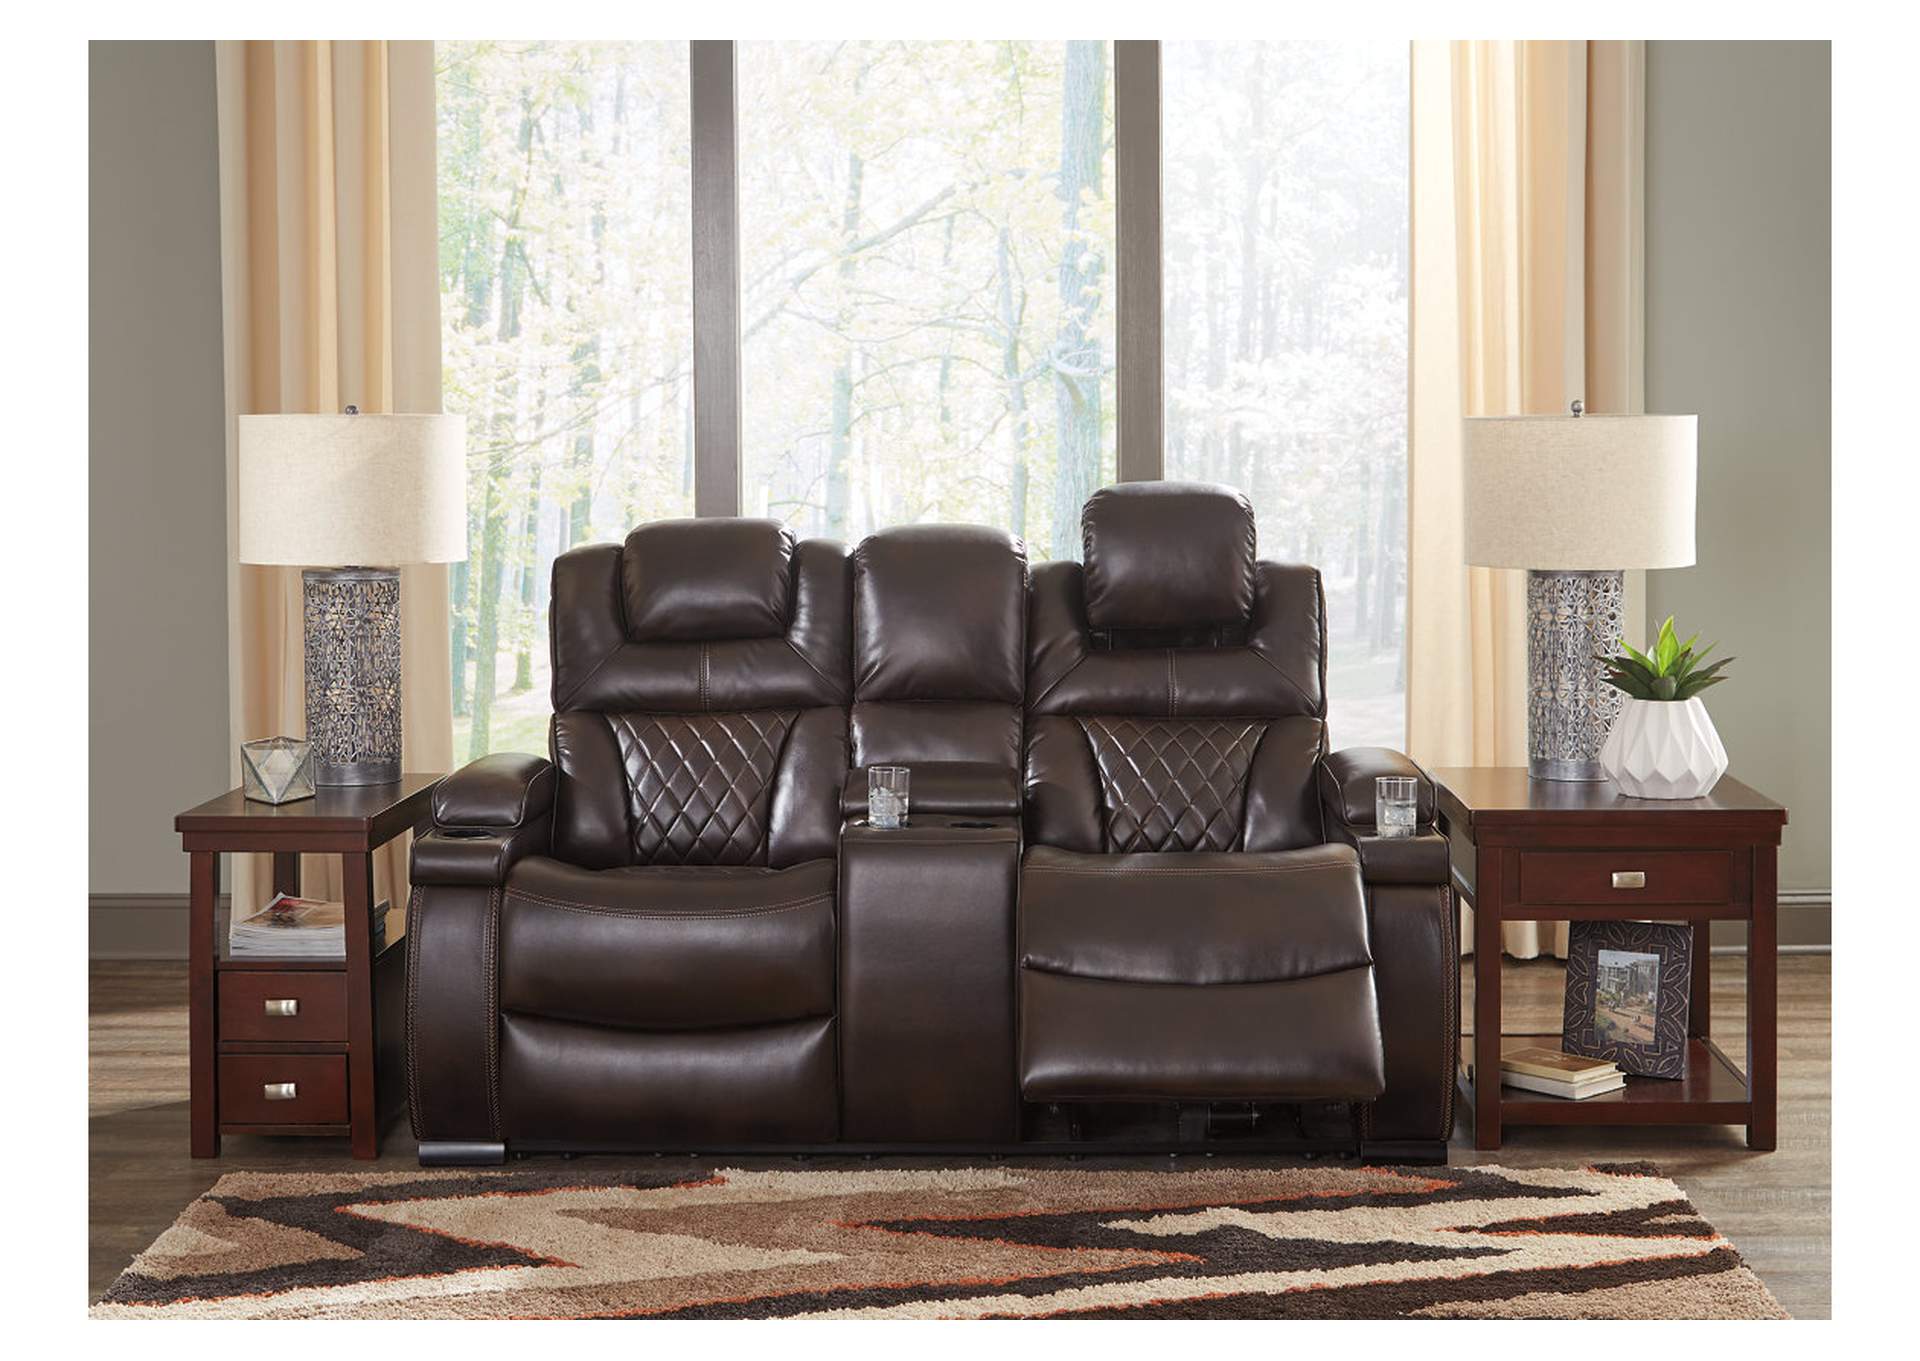 Warnerton Power Reclining Loveseat with Console,Signature Design By Ashley